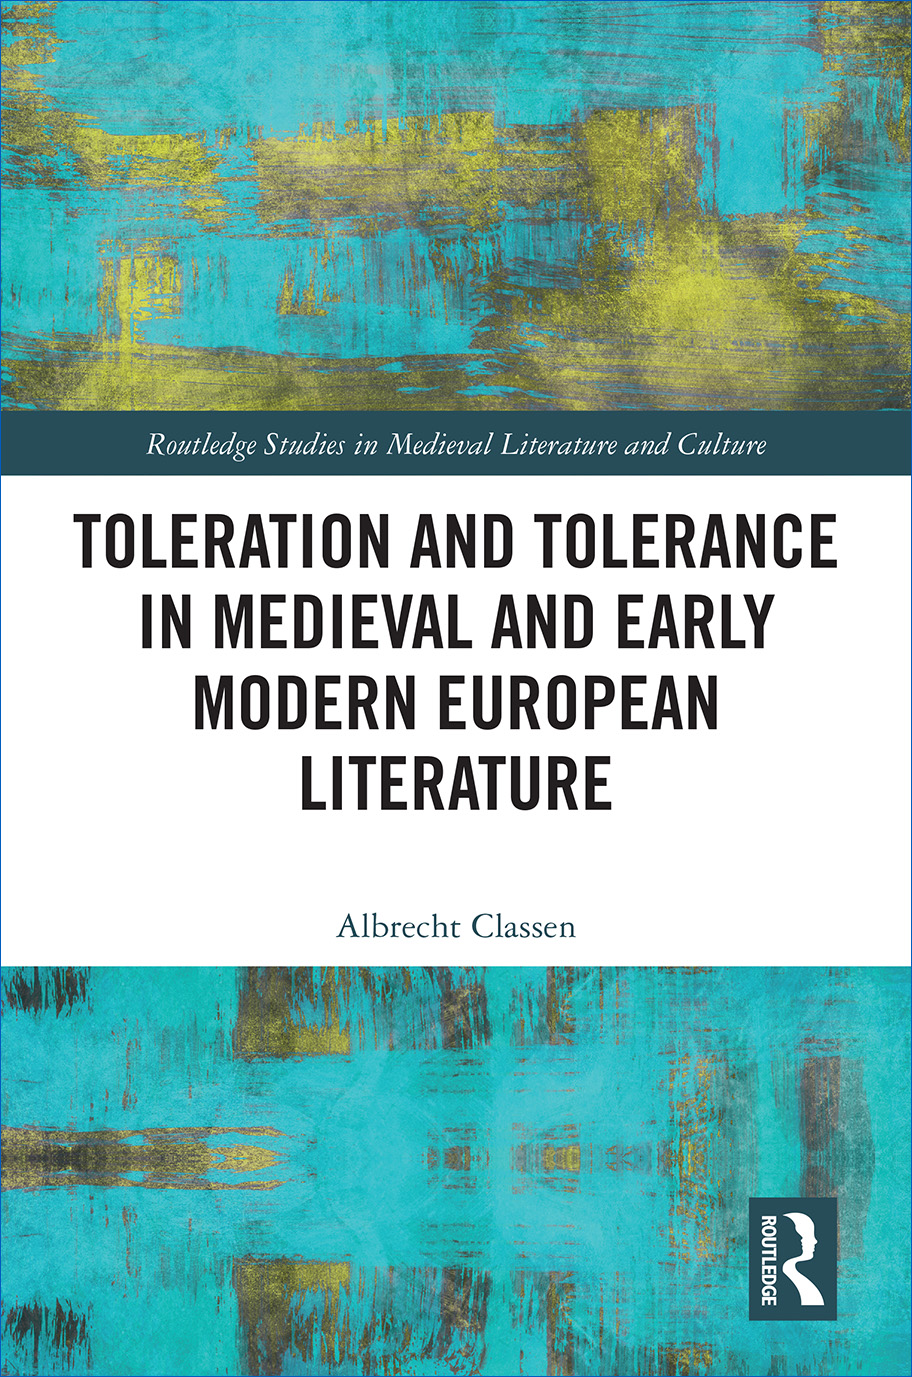 Toleration and Tolerance in Medieval and Early Modern European Literature - photo 1